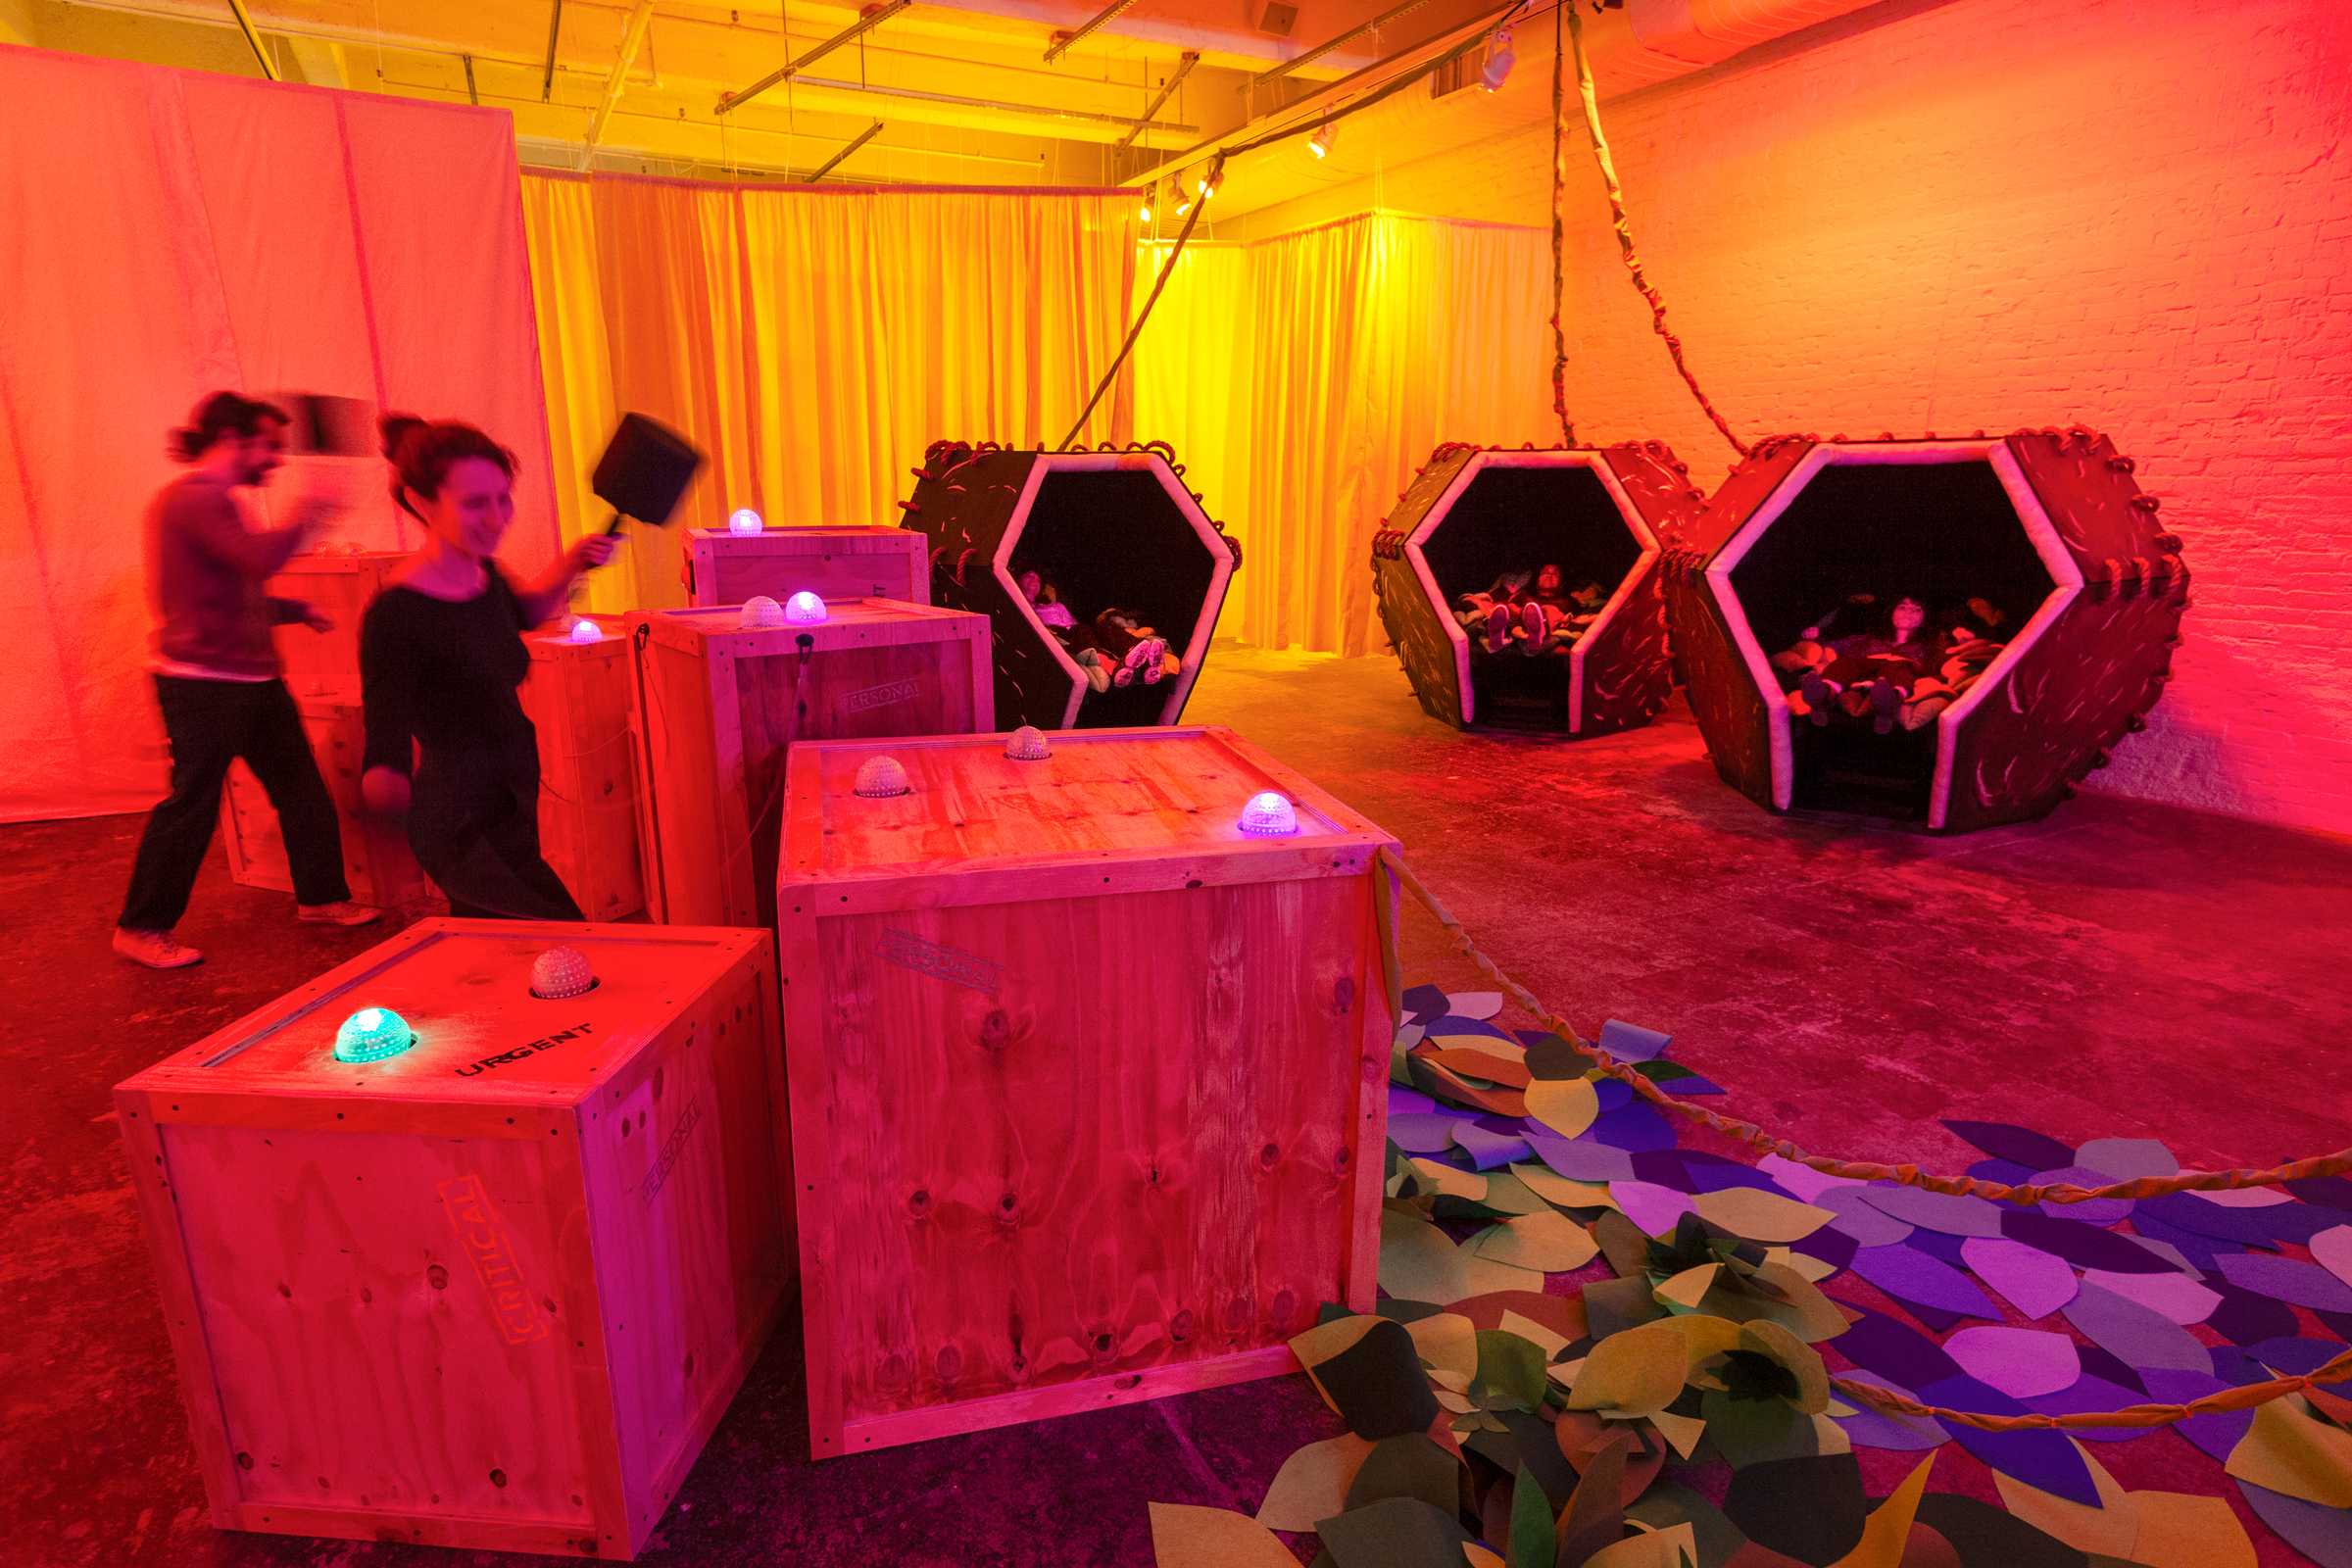 A view of a gallery bathed in pink/orange light. Two people (at left) play a Wac-a-mole-like game with colorful orbs that light up on crates. Three hexagonal-shaped pods sit in the back-right of the room.